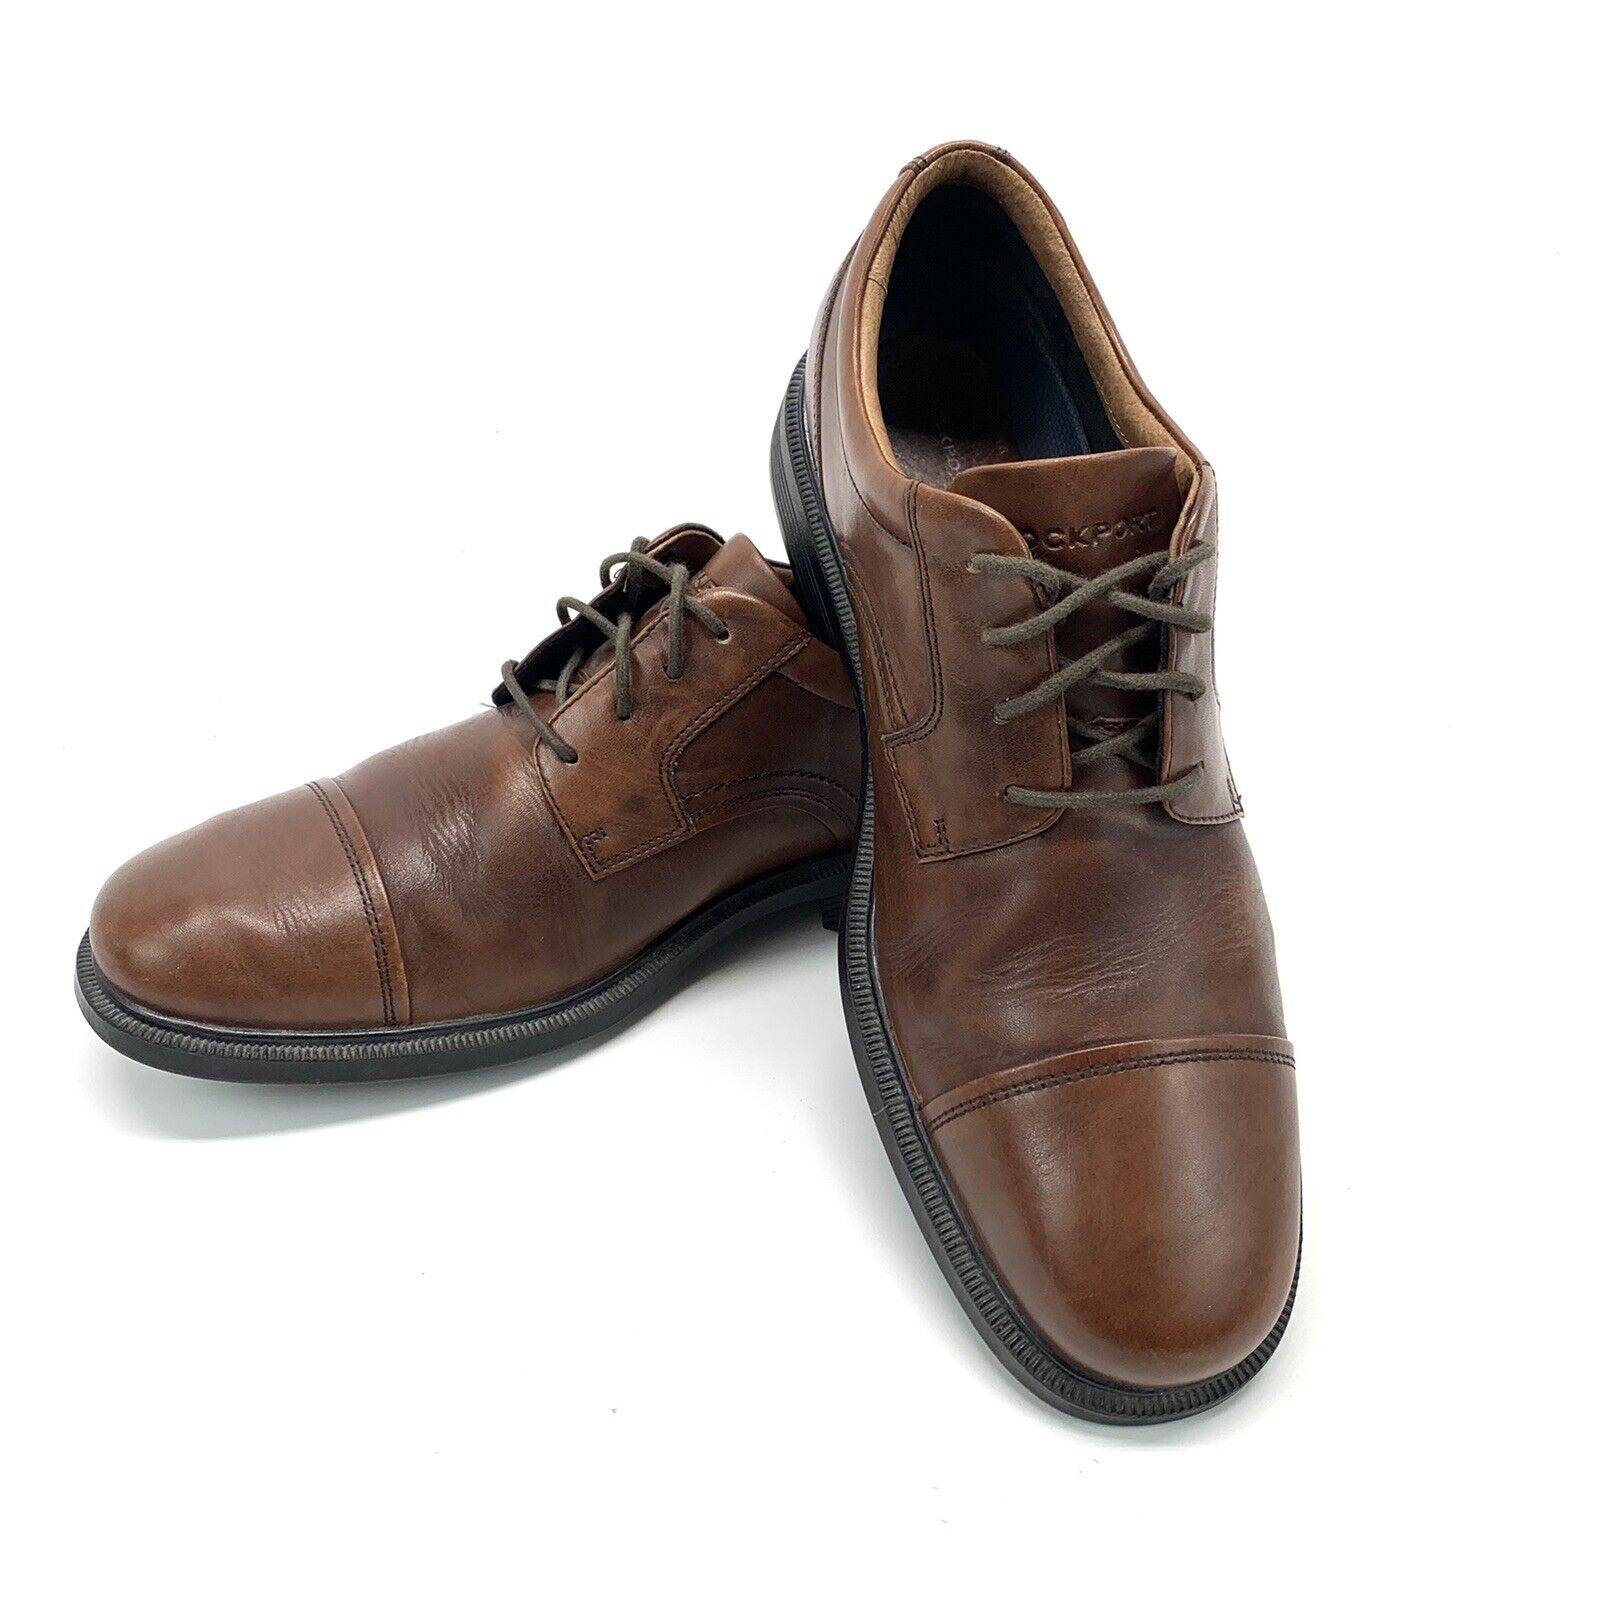 Rockport Manufacturer regenerated product Adiprene Men#039;s Leather Shoes Brown San Jose Mall Cap Toe Si Lace